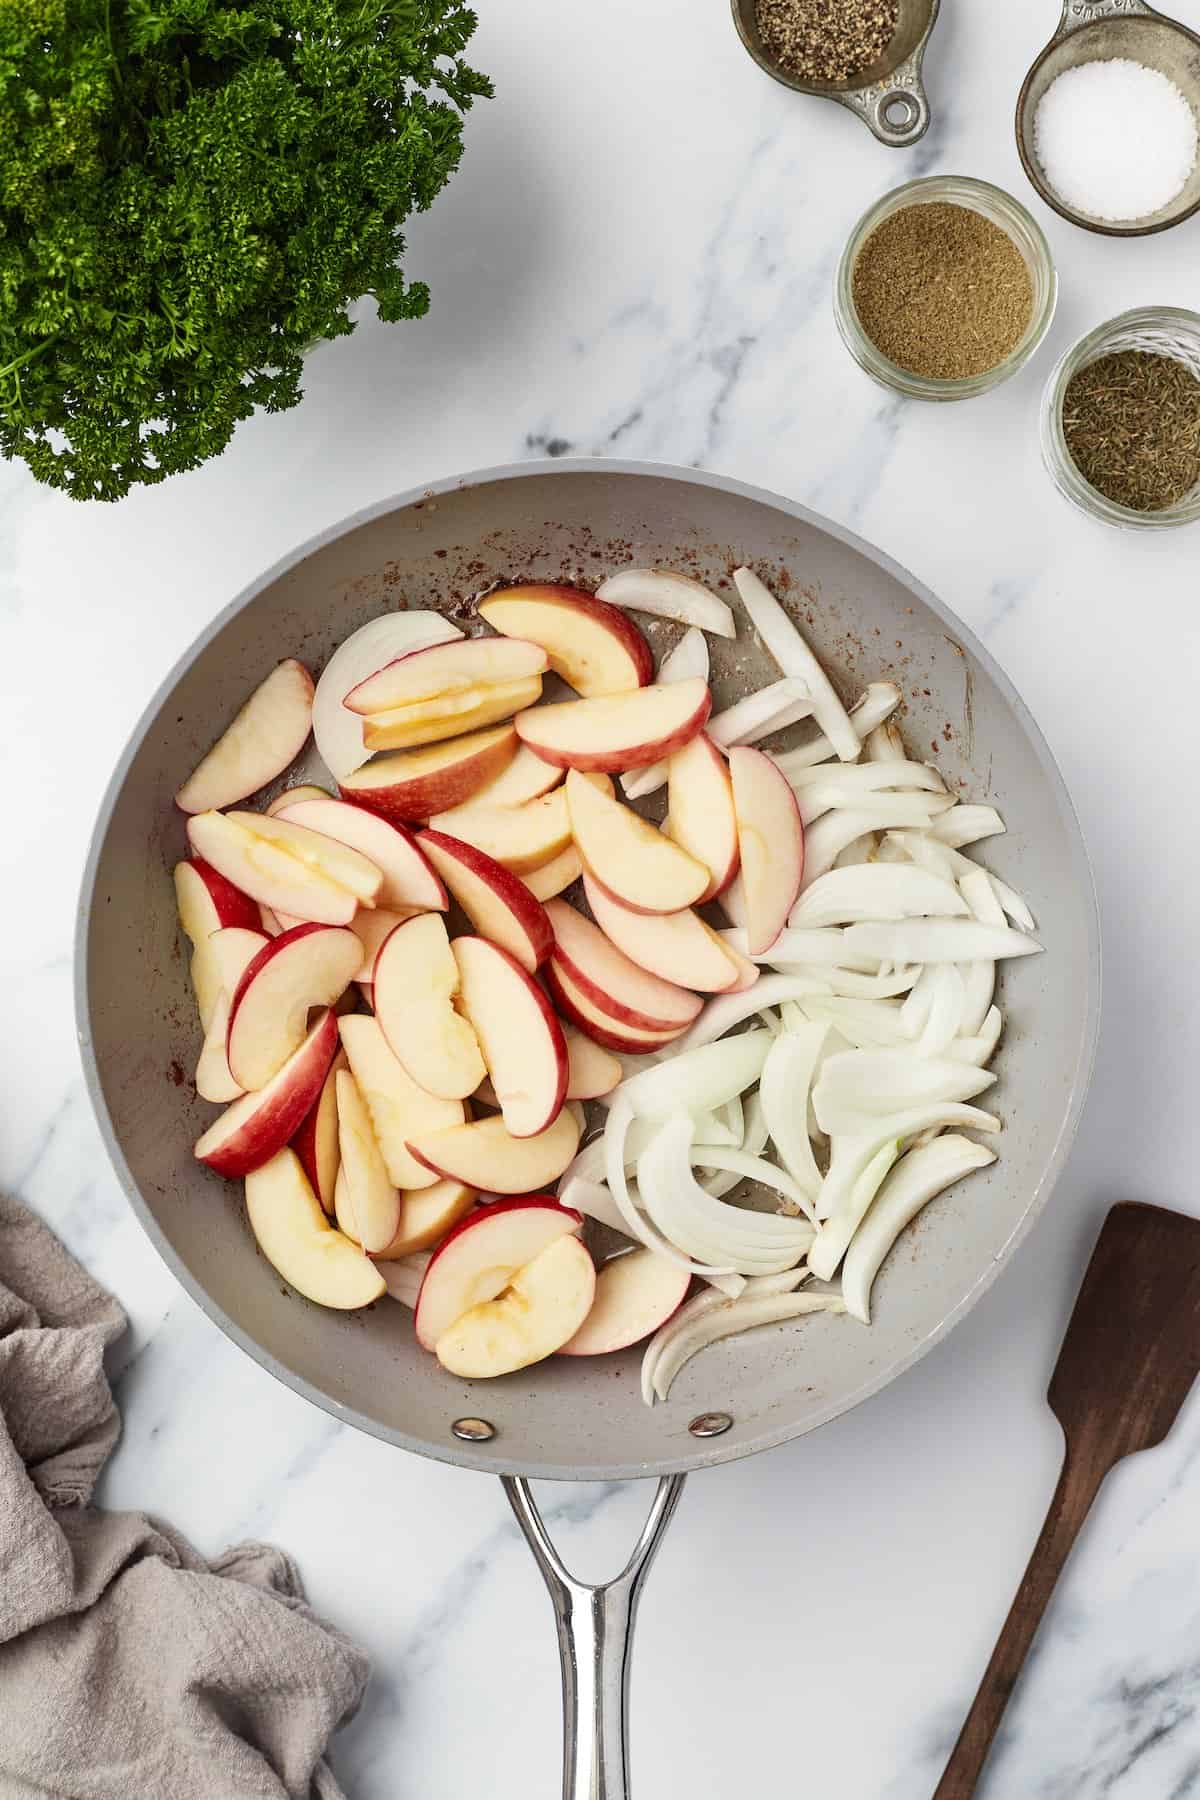 Apples and onions in skillet, before cooking